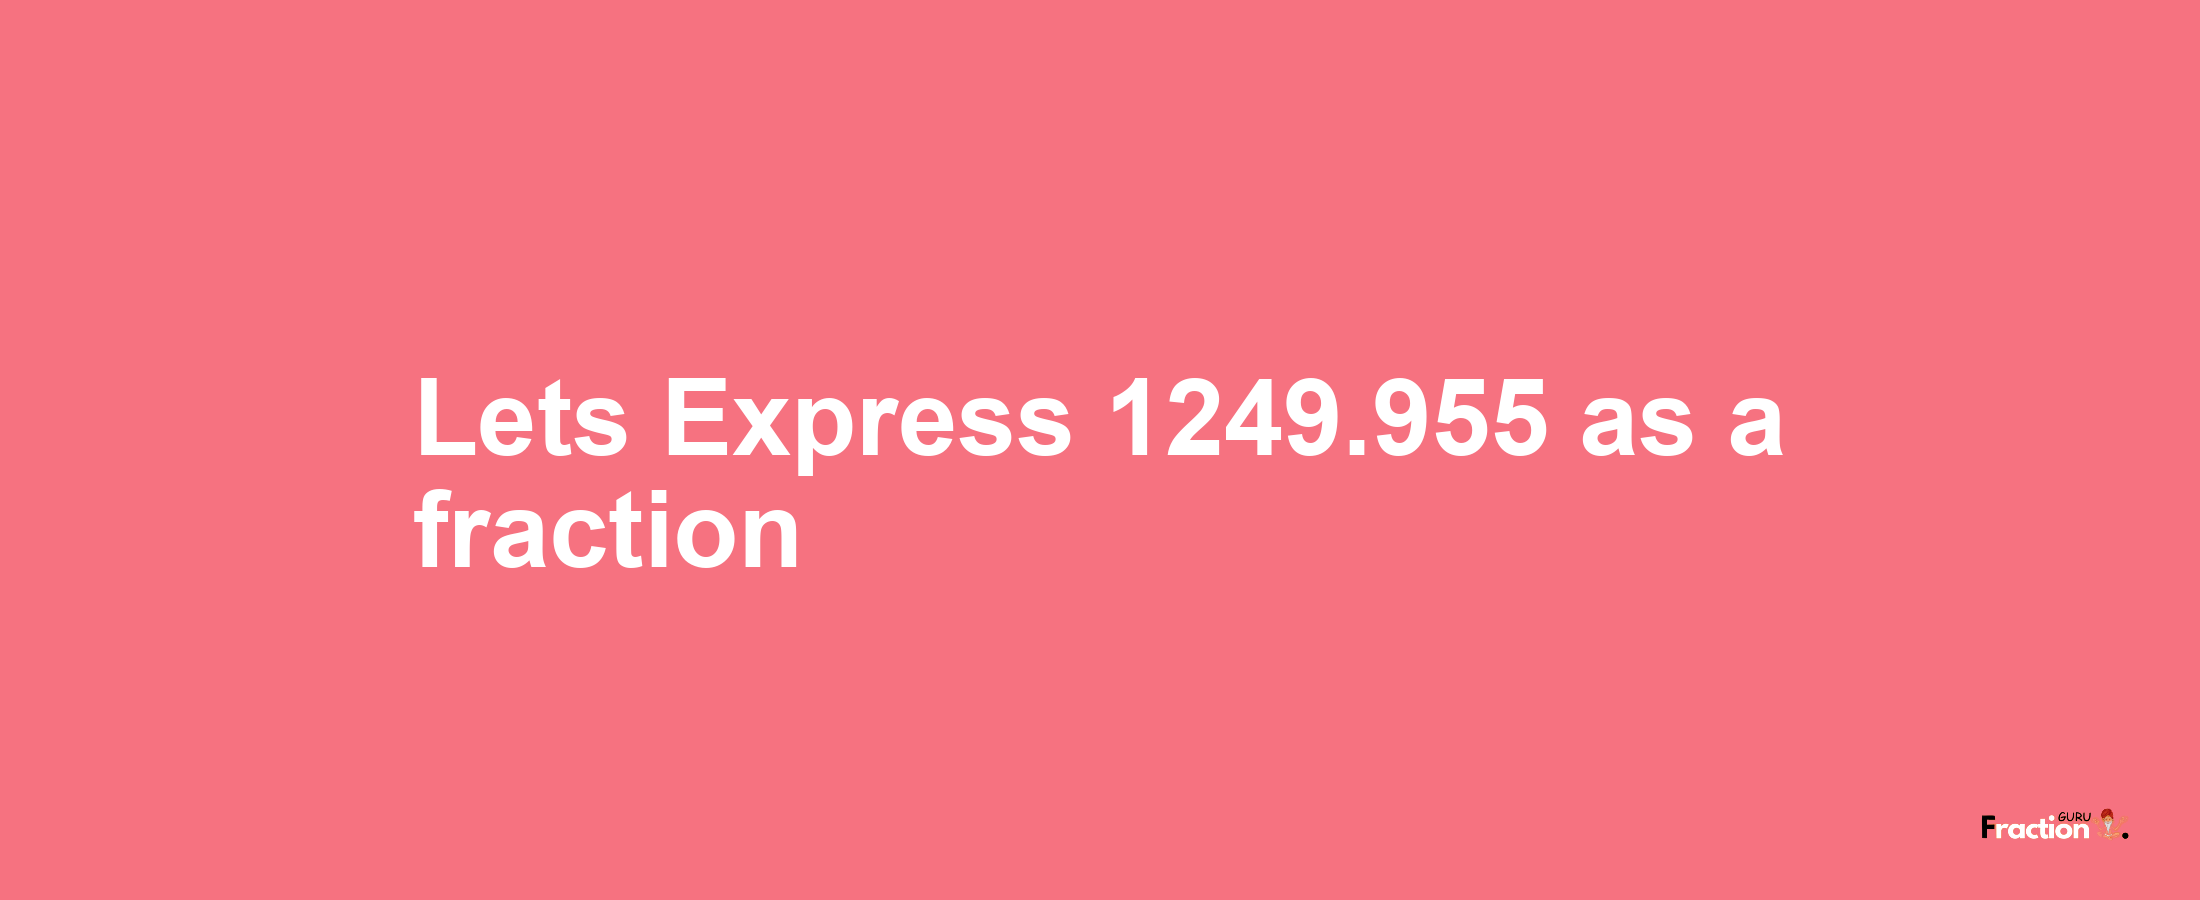 Lets Express 1249.955 as afraction